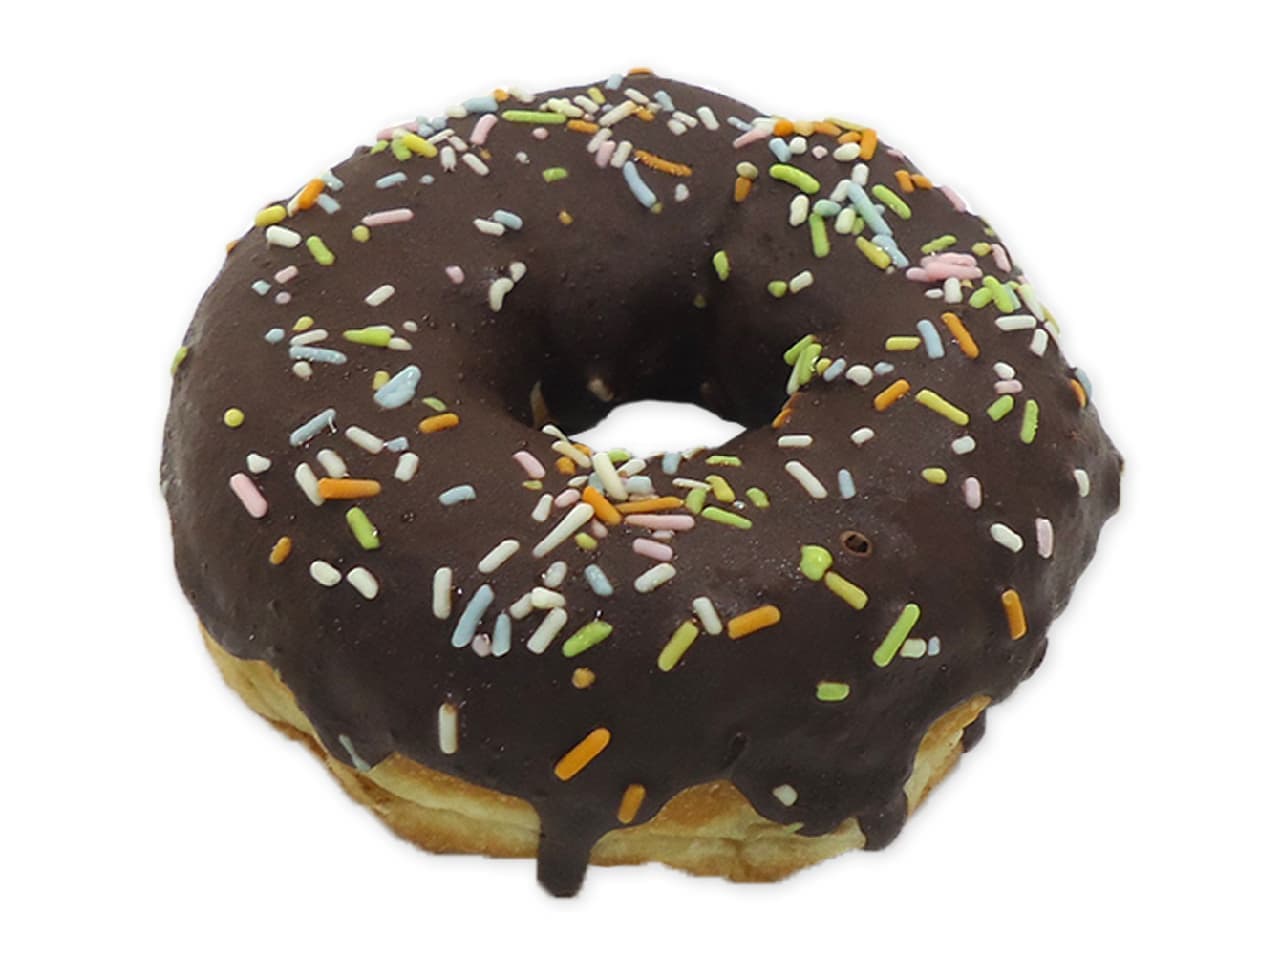 7-ELEVEN "Colorful Chocolate Ring Doughnut